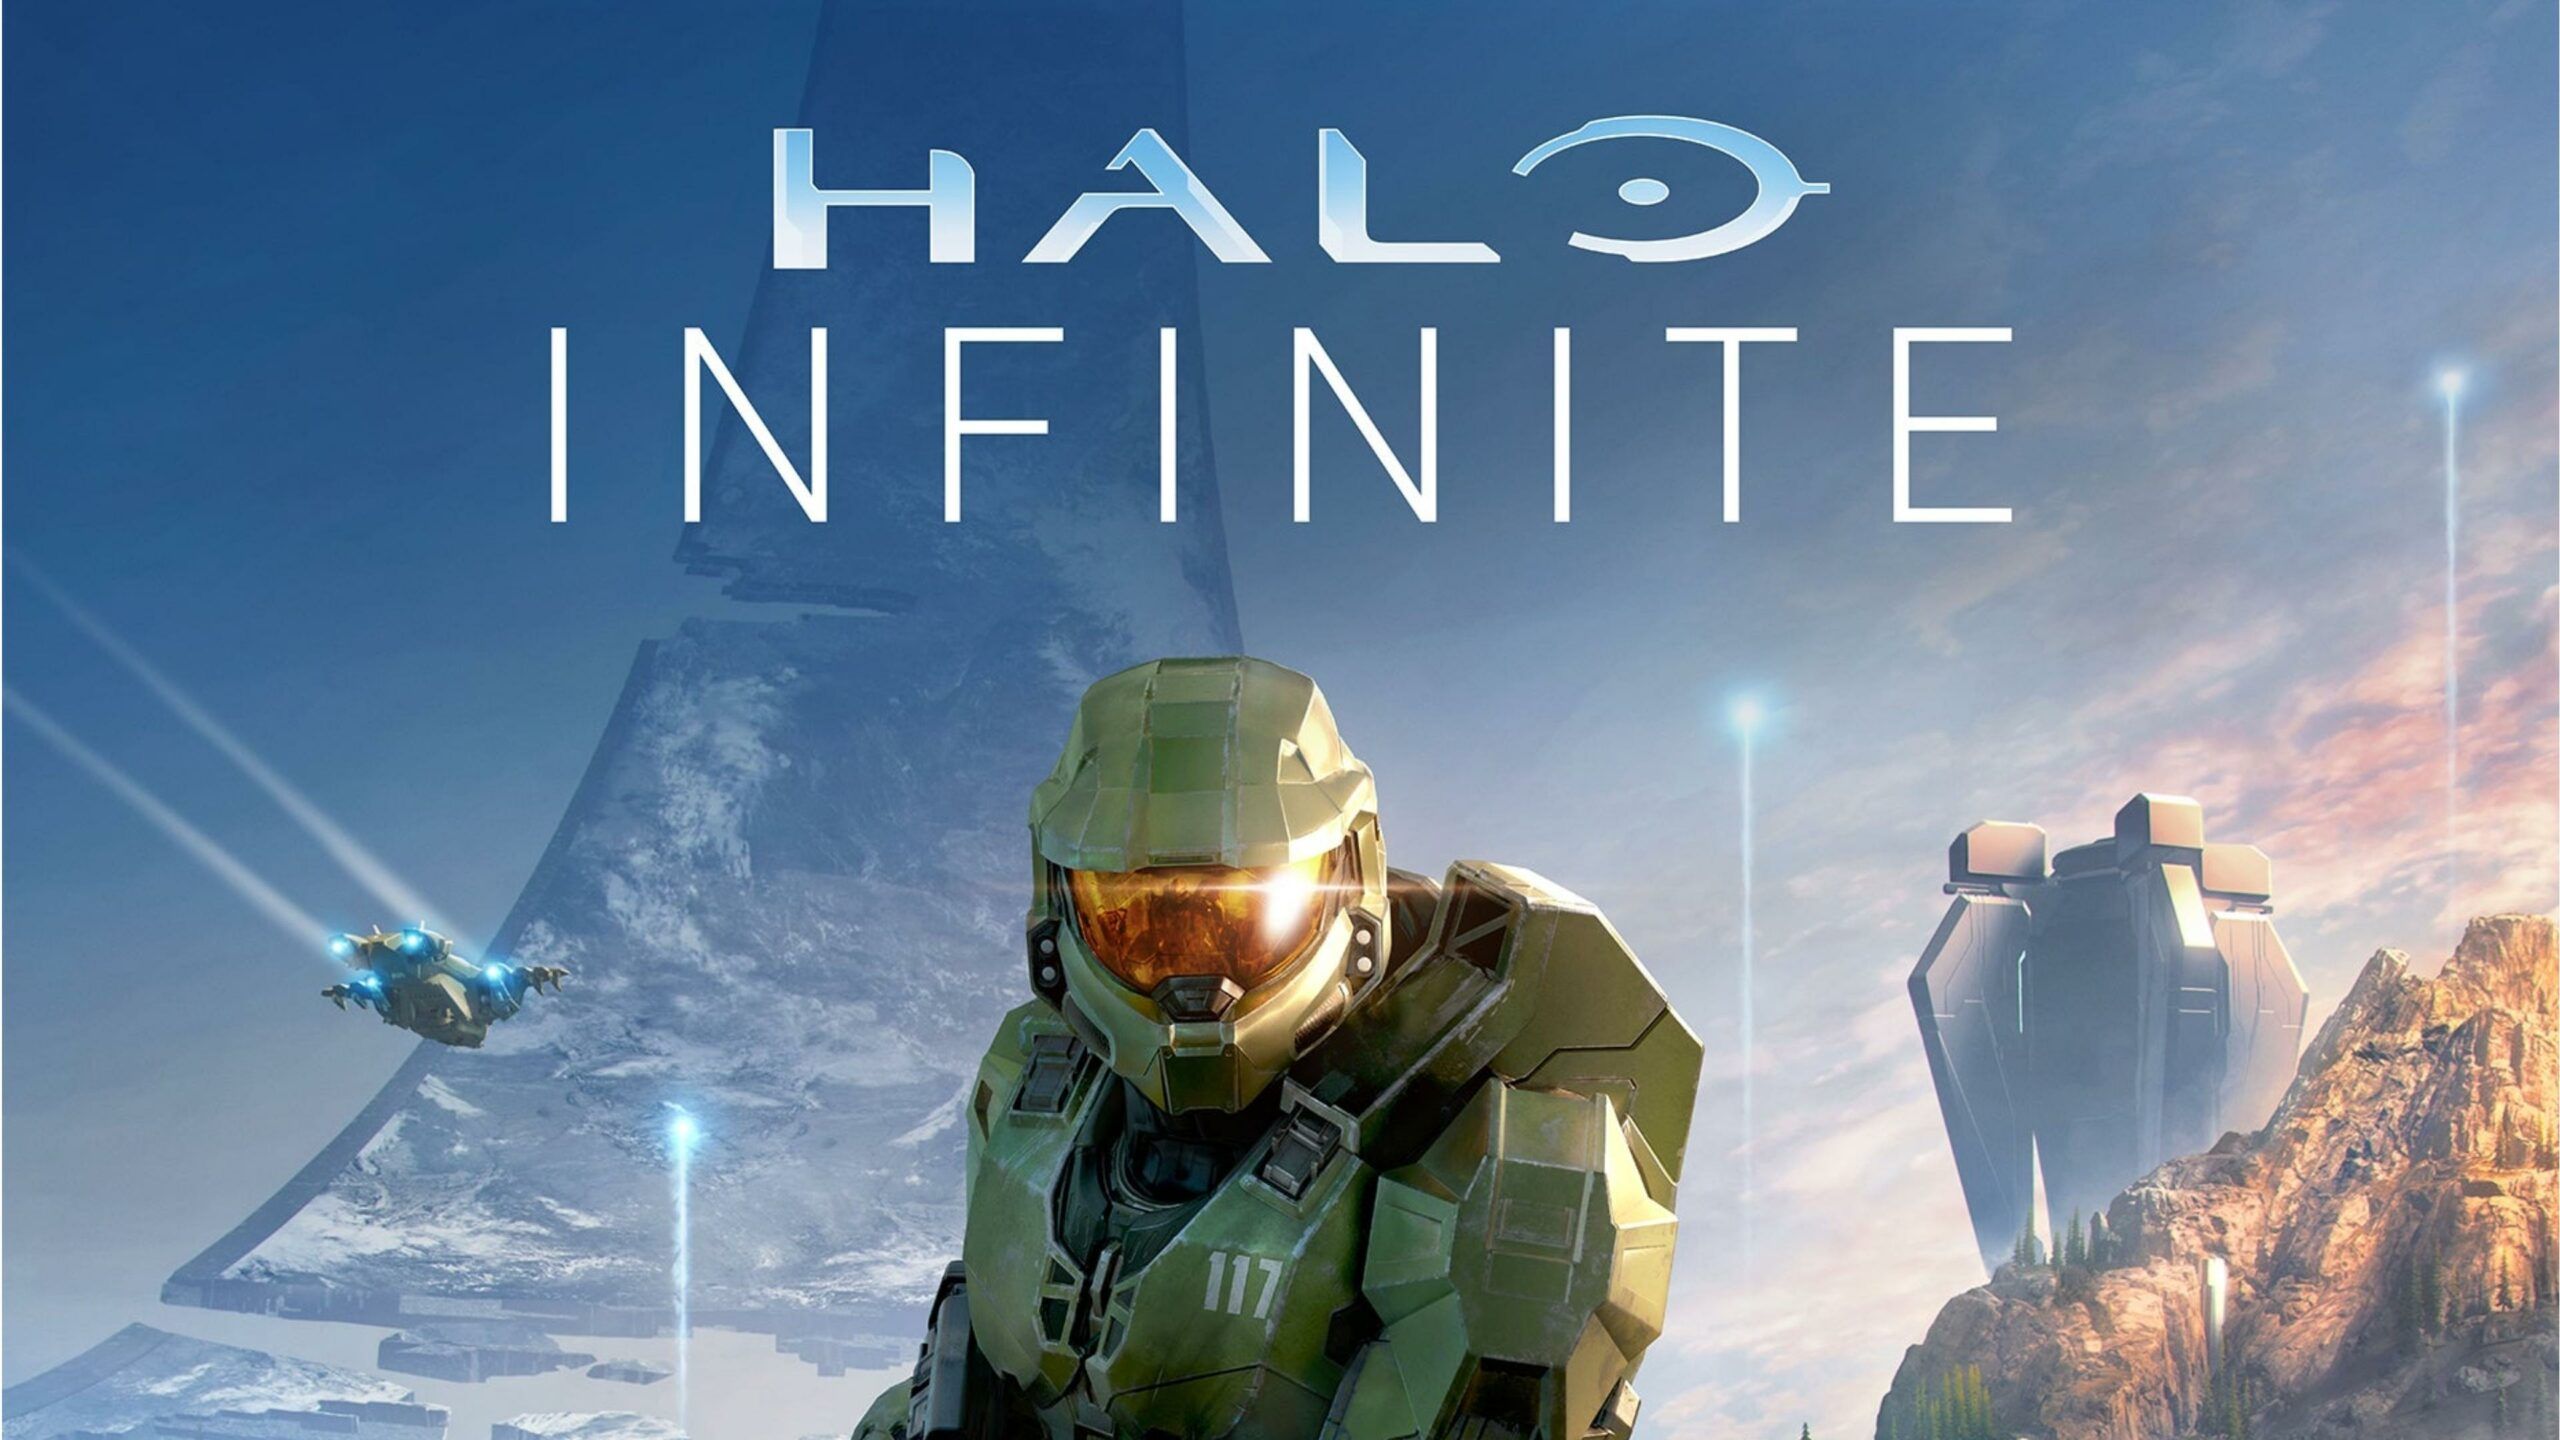 The Halo Infinite Winter Update is live – Here's the full patch notes